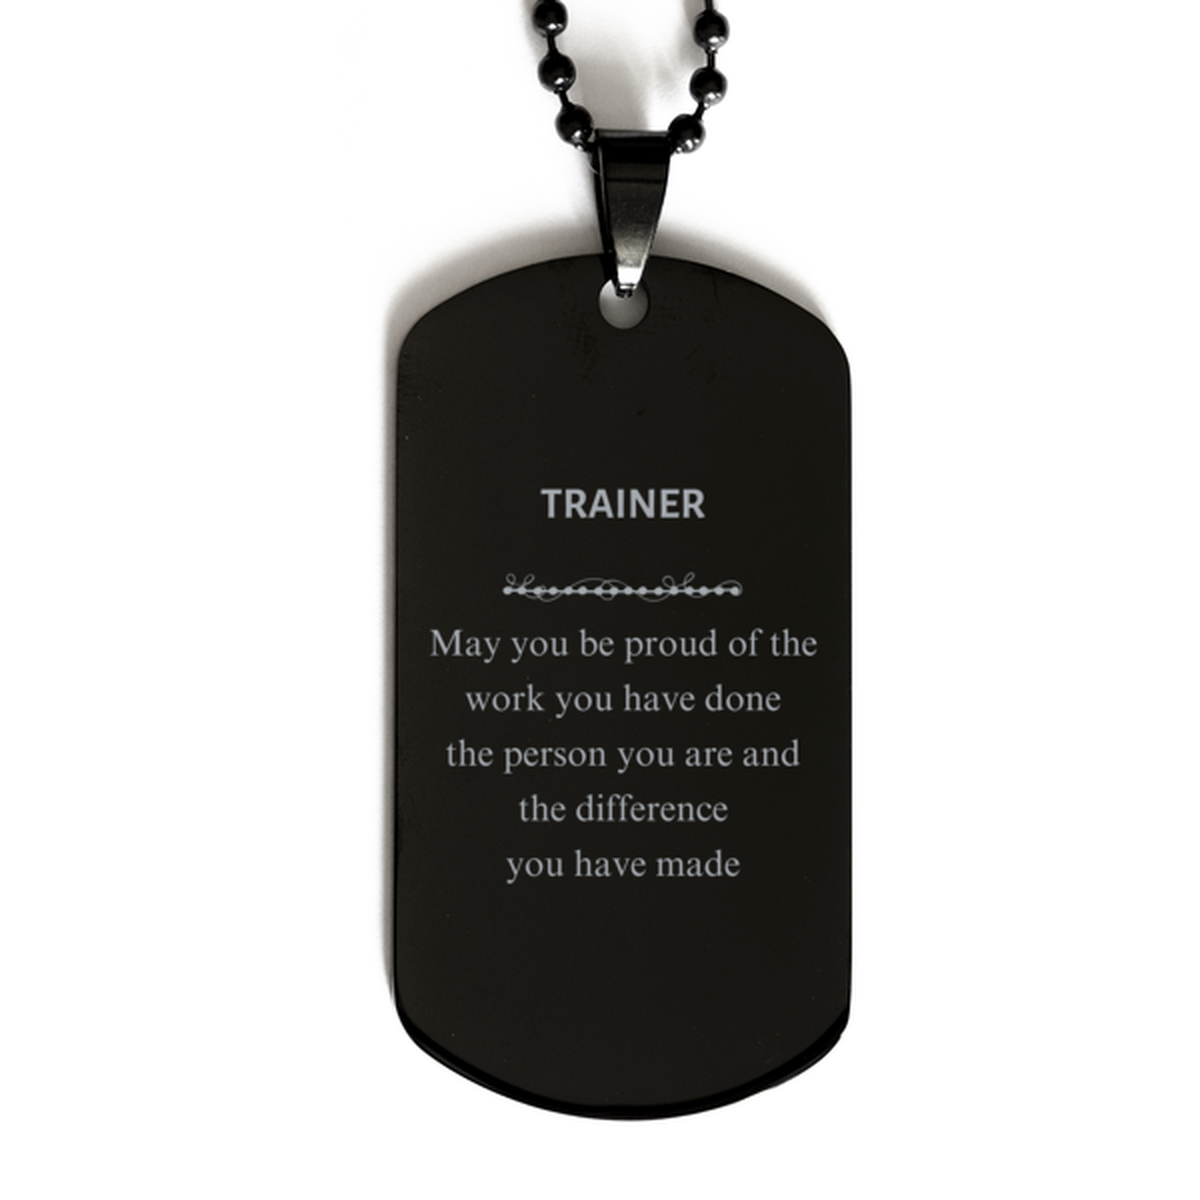 Trainer May you be proud of the work you have done, Retirement Trainer Black Dog Tag for Colleague Appreciation Gifts Amazing for Trainer